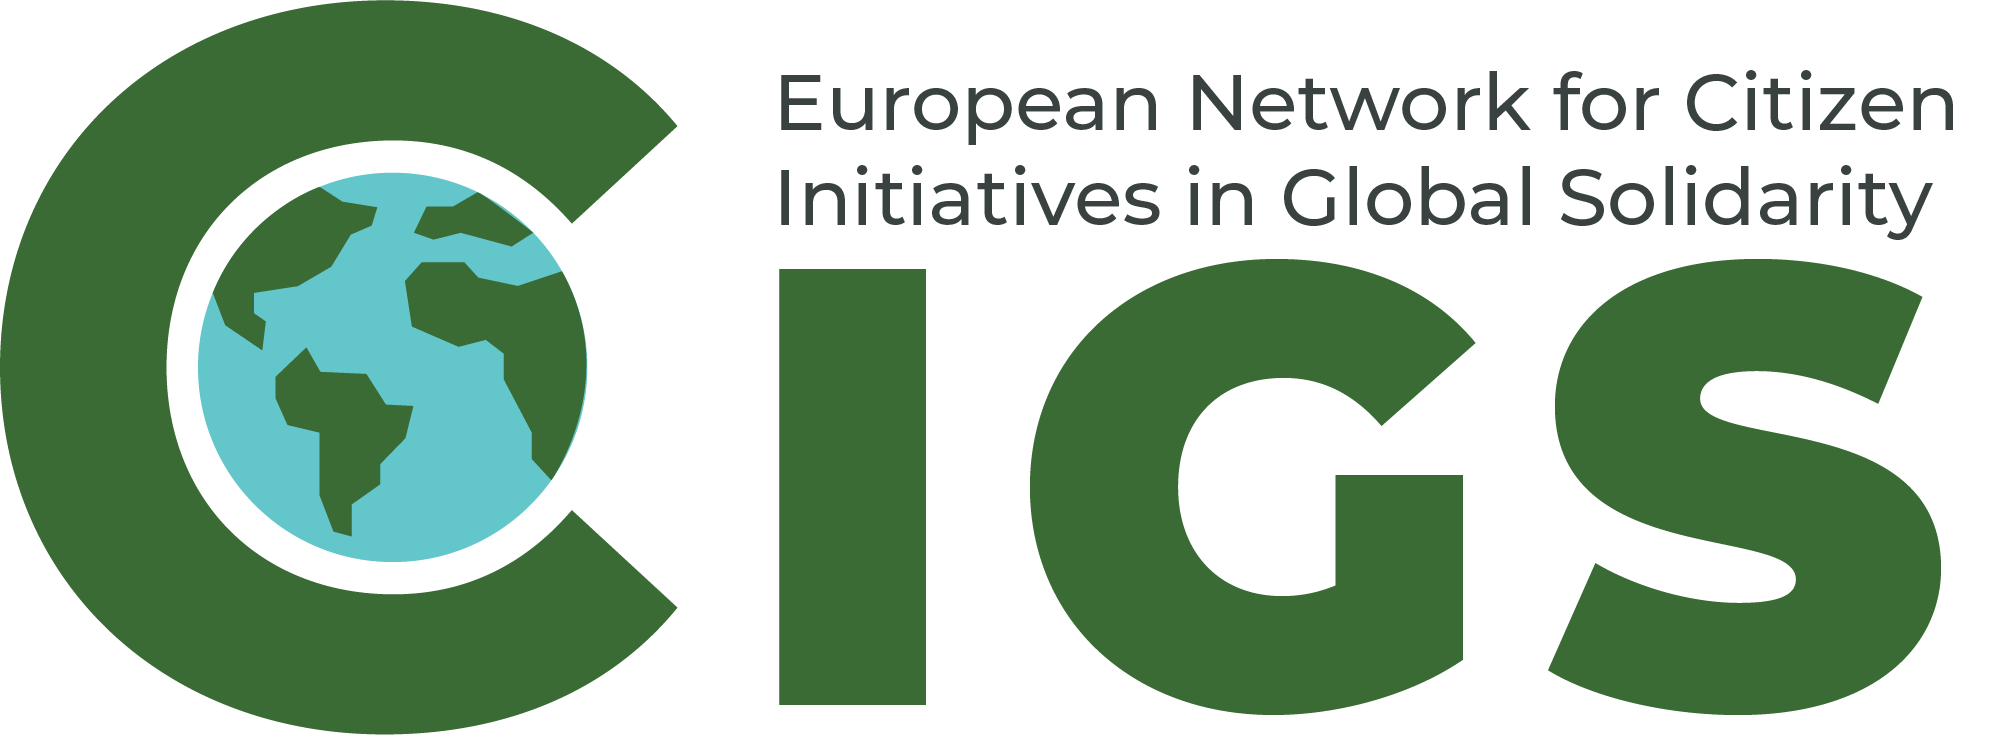 European Network for Citizen Initiatives in Global Solidarity